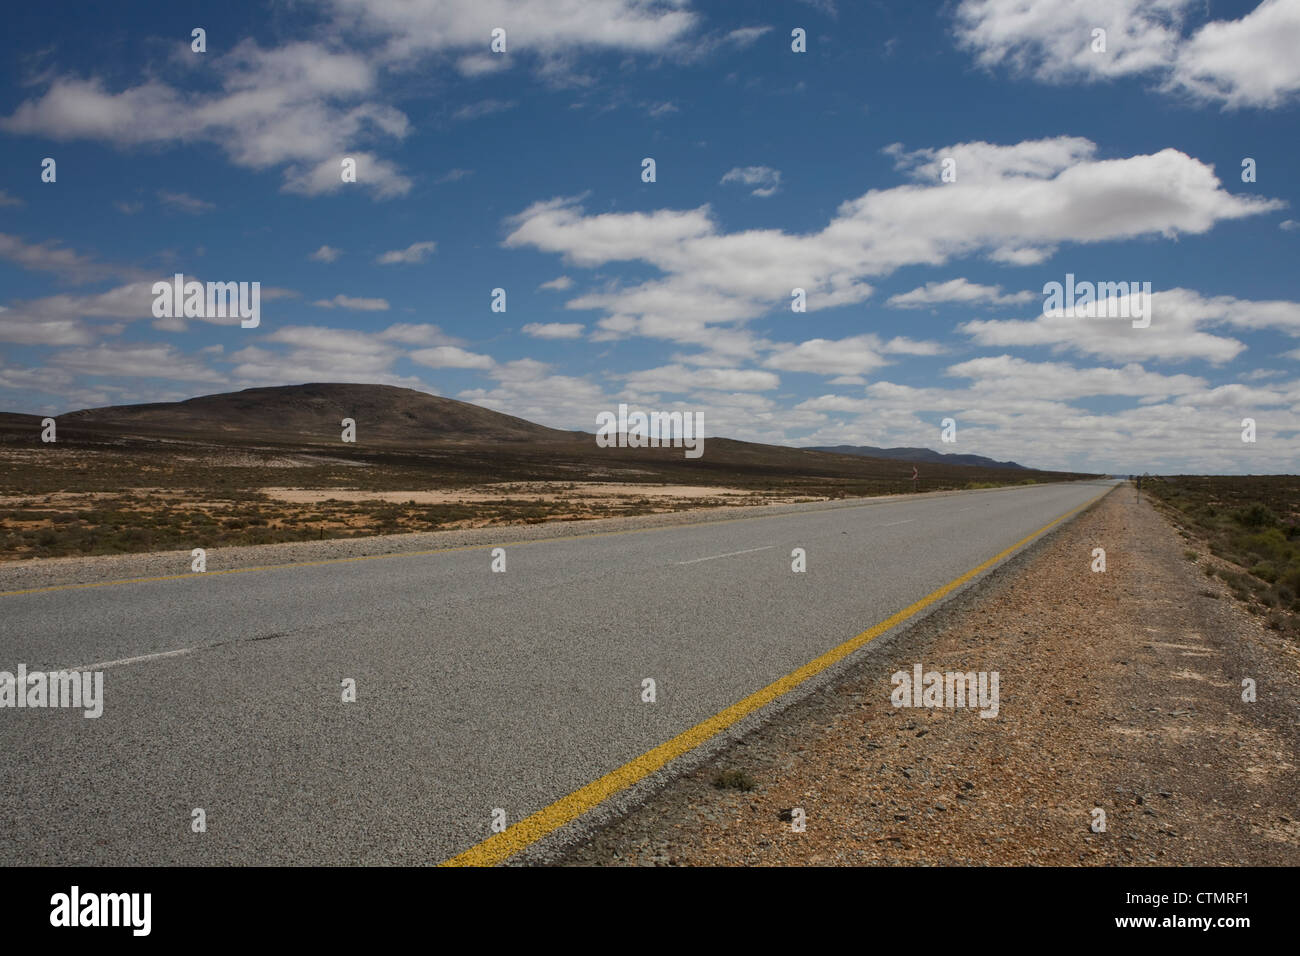 Tar road with markings, Northern Cape Province, South Africa Stock Photo